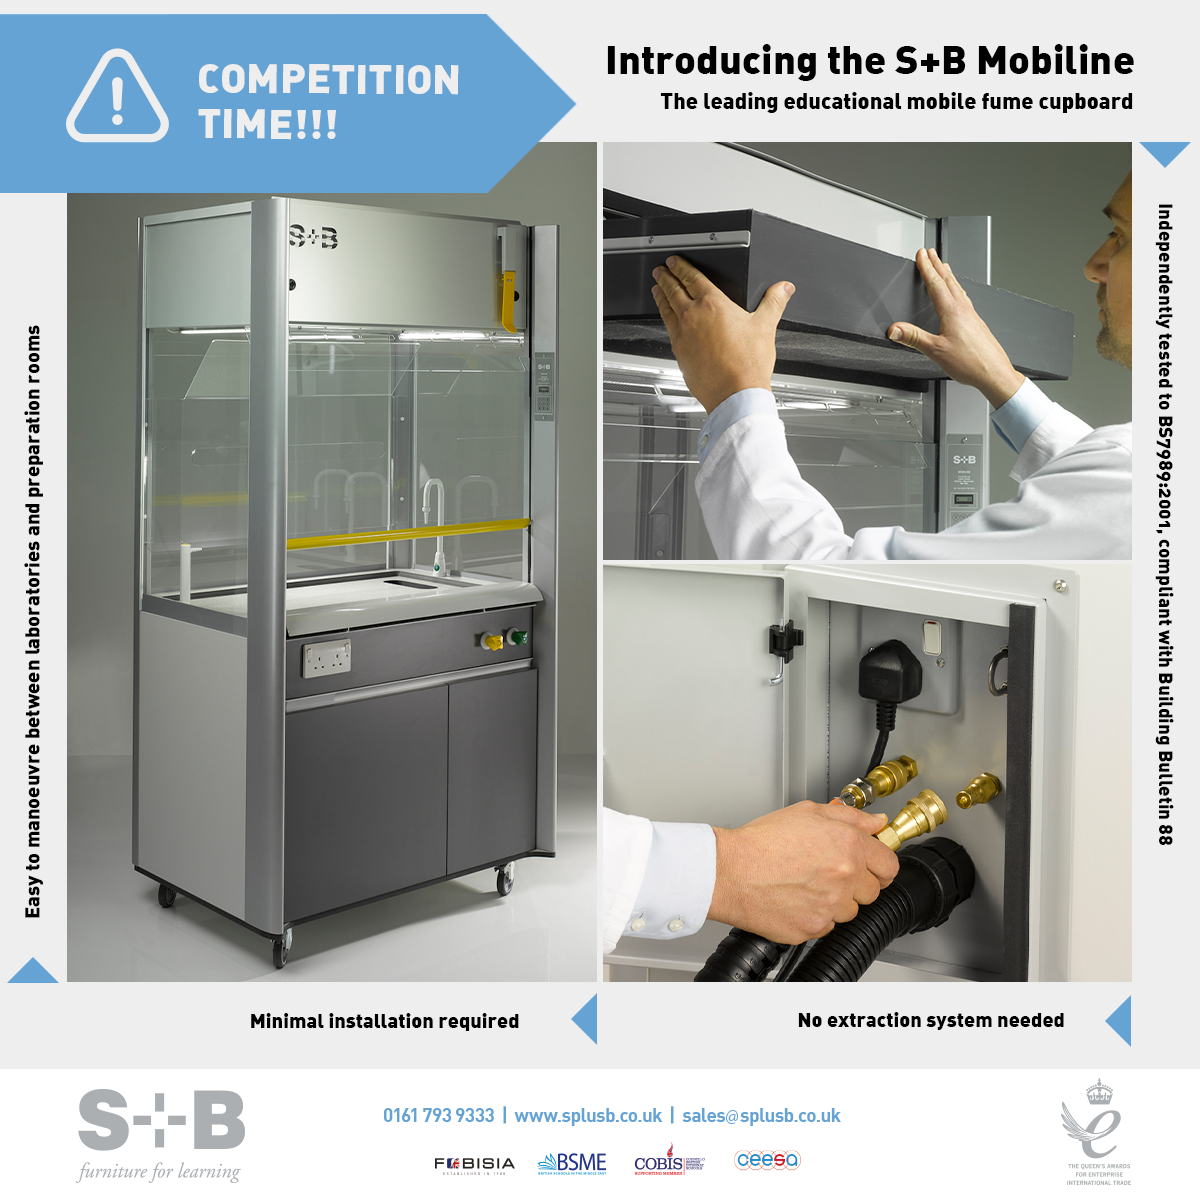 Mobile Fume Cupboard Competition